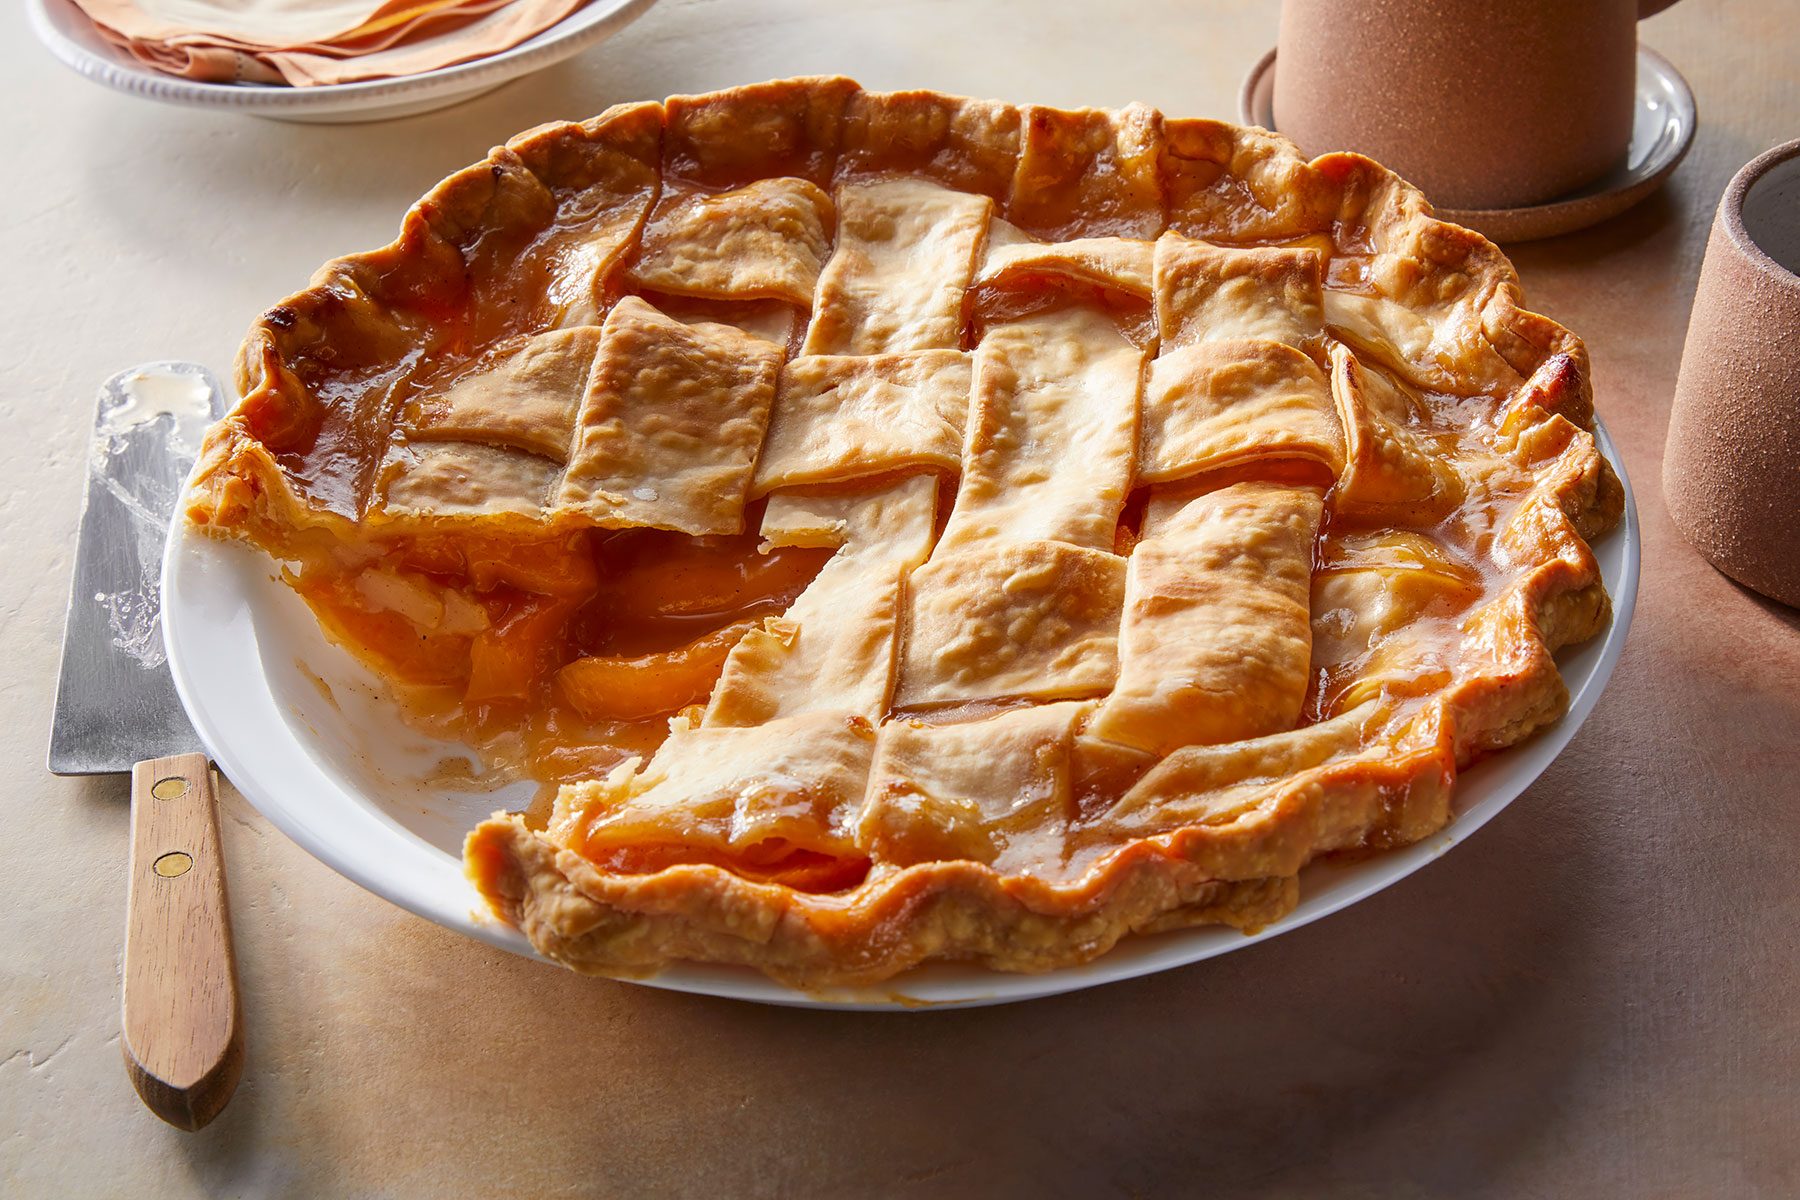 Slice of Peach Pie cut out of whole peach pie